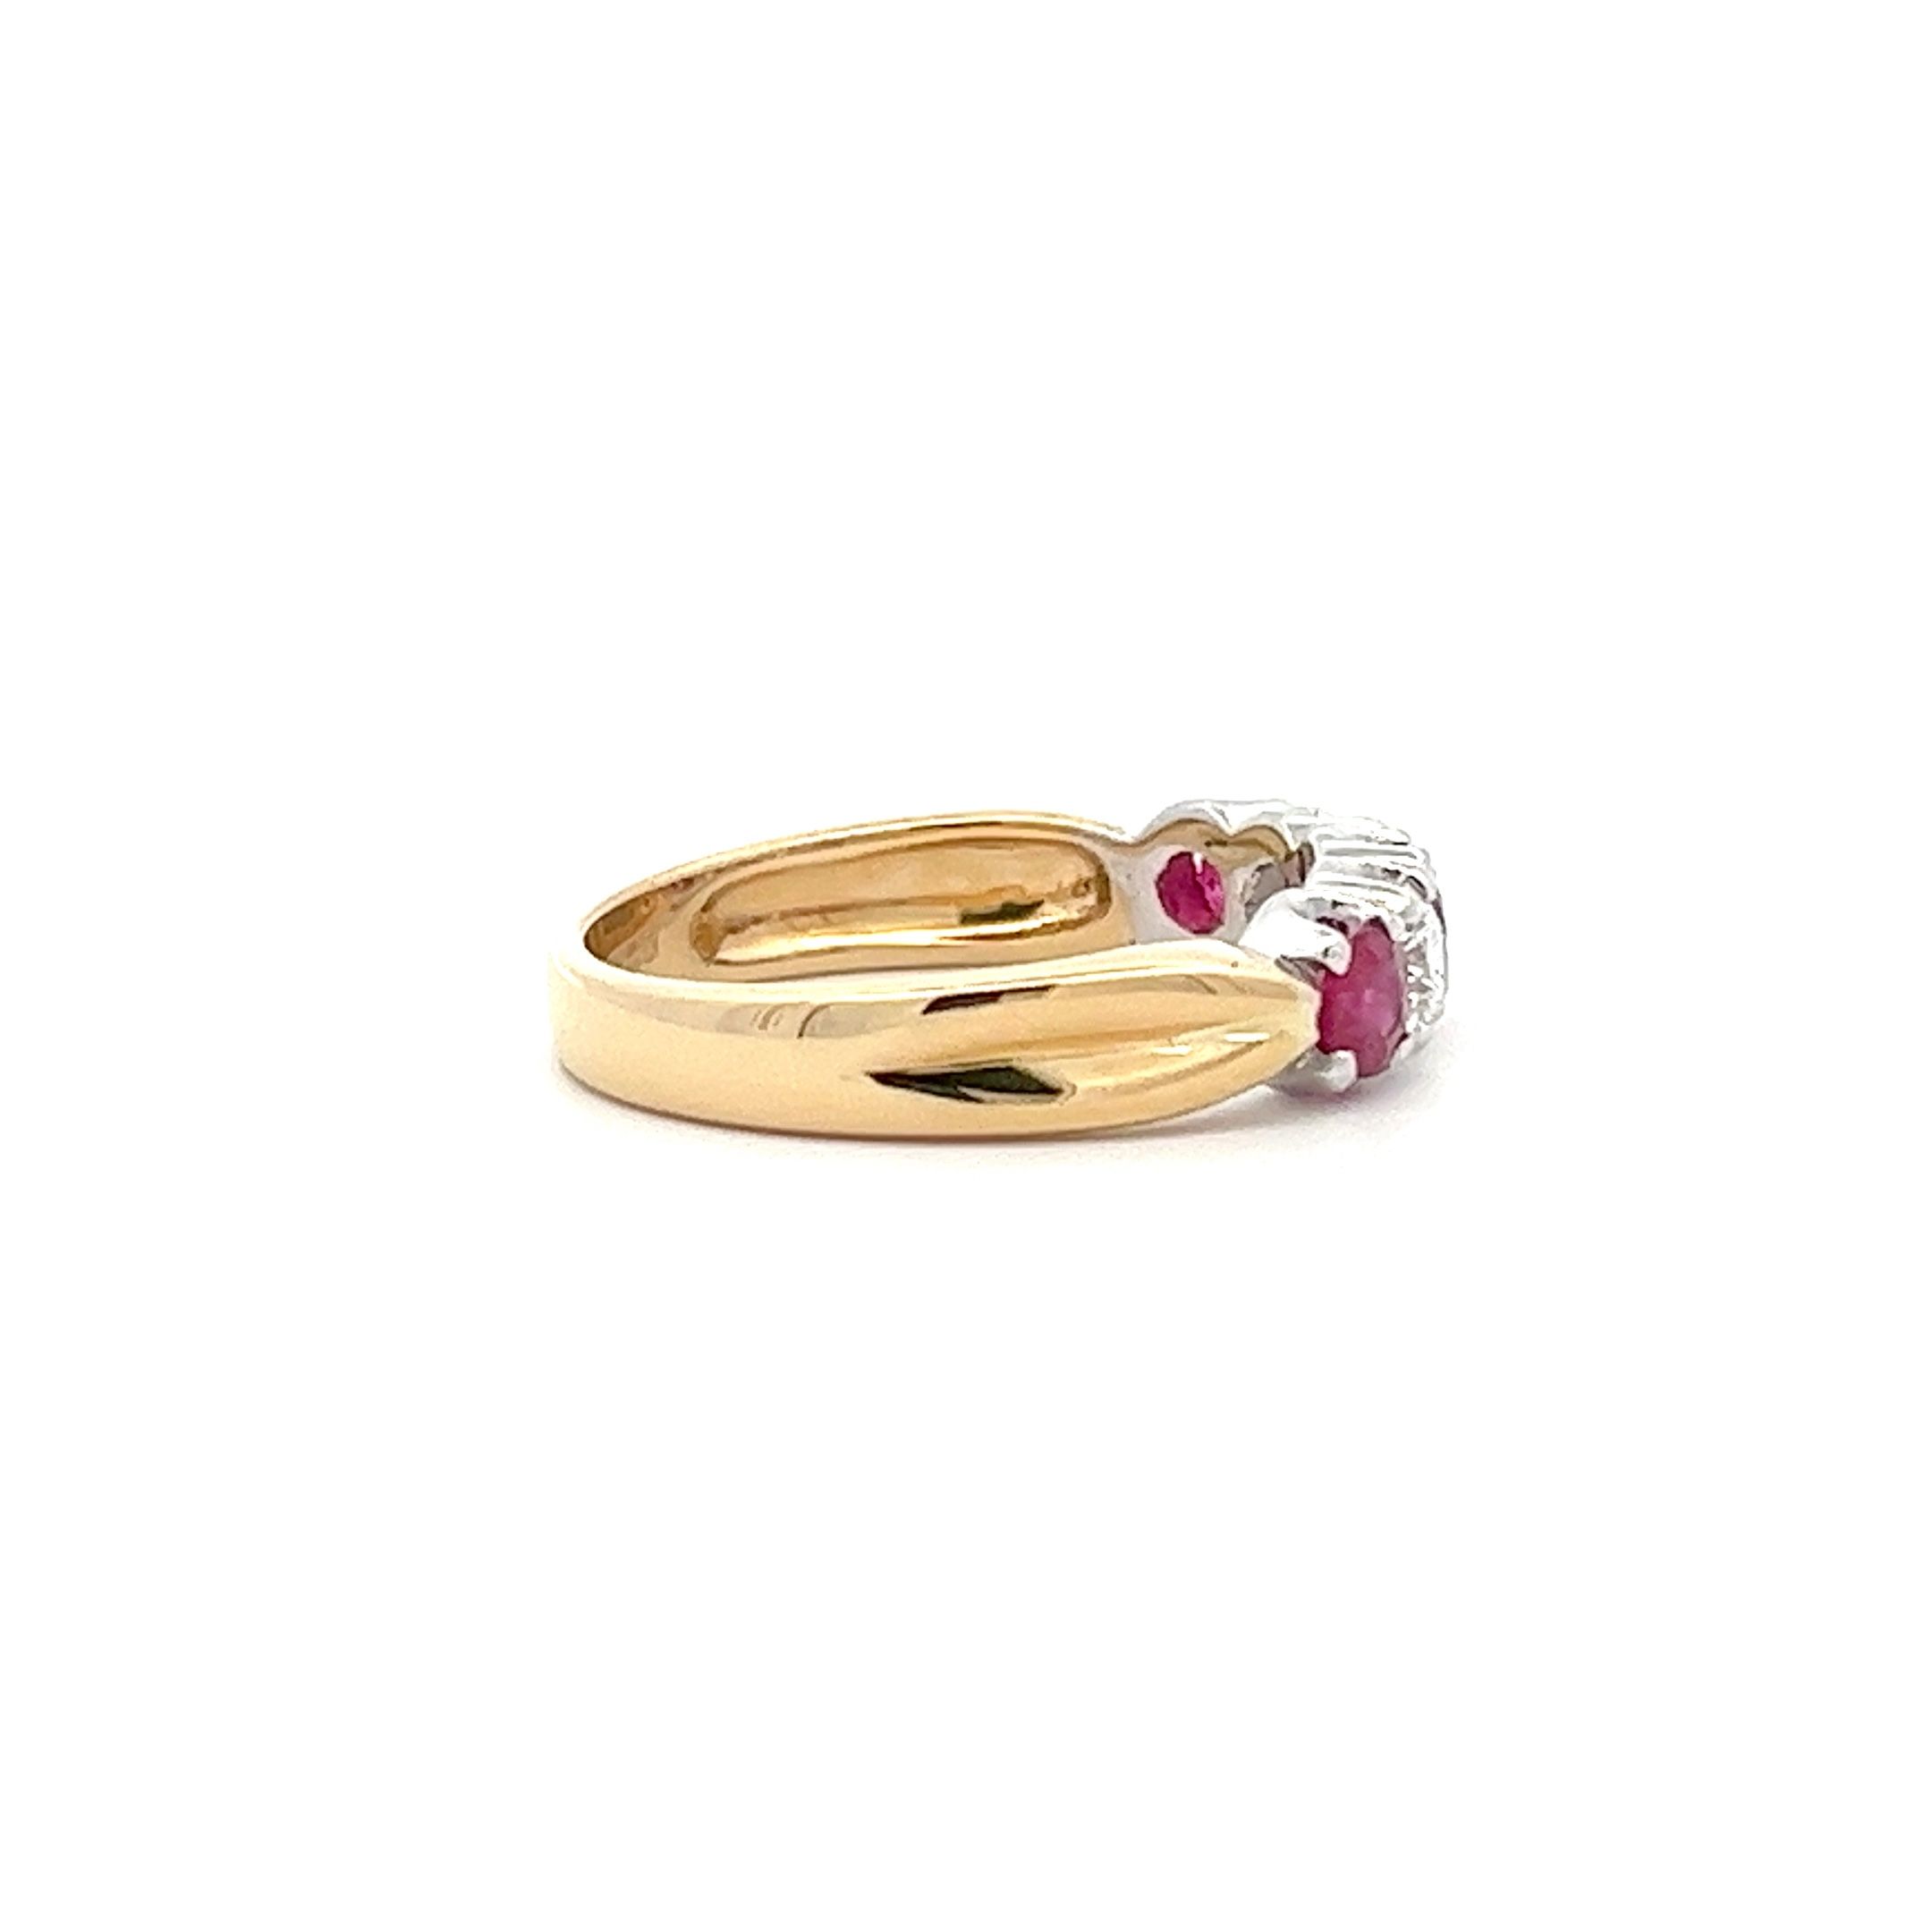 0.29ct Diamond and 0.55ct Ruby, 18ct Yellow and White Gold 5 Stone Ring